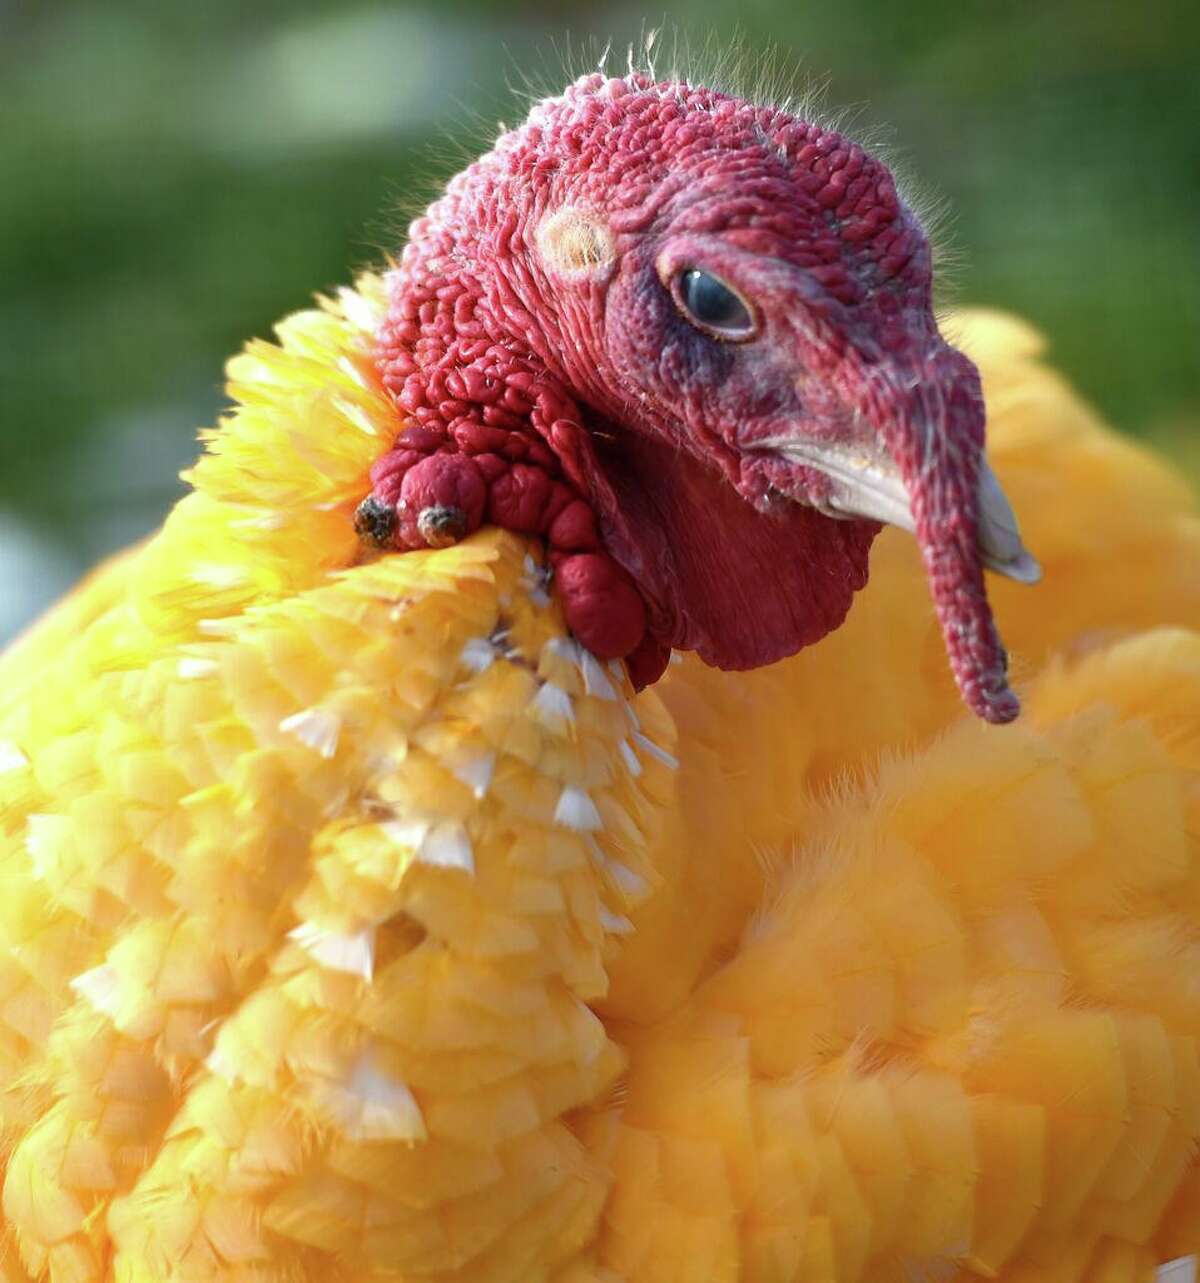 In this file photo, Gozzi's Turkey Farm’s yearly tradition of turkeys dyed in different colors., here in 2018. According to snftoday.com, 46 million turkeys are eaten each Thanksgiving. - The first Thanksgiving included 90 Wampanoag Indians. The 2010 Census counted 6,500 members of the Wampanoag American Indian tribal grouping. - In 1620, the estimated population was 2,499 (The census bureau cites this table on page 25 of “Historical Statistics of the United States,” published in 1949 by the Census Bureau.) - Fifty-three pilgrims celebrated the fall harvest, an English tradition, in the New World in 1621. - In 2018, some 22.8 million people in the U.S. reported English ancestry. The number in Massachusetts was 607,612. - President Abraham Lincoln named the last Thursday of November as a national day of thanksgiving on Oct. 3, 1863. - President Franklin Roosevelt officially “declared that Thanksgiving should always be celebrated on the fourth Thursday of the month to encourage earlier holiday shopping.”